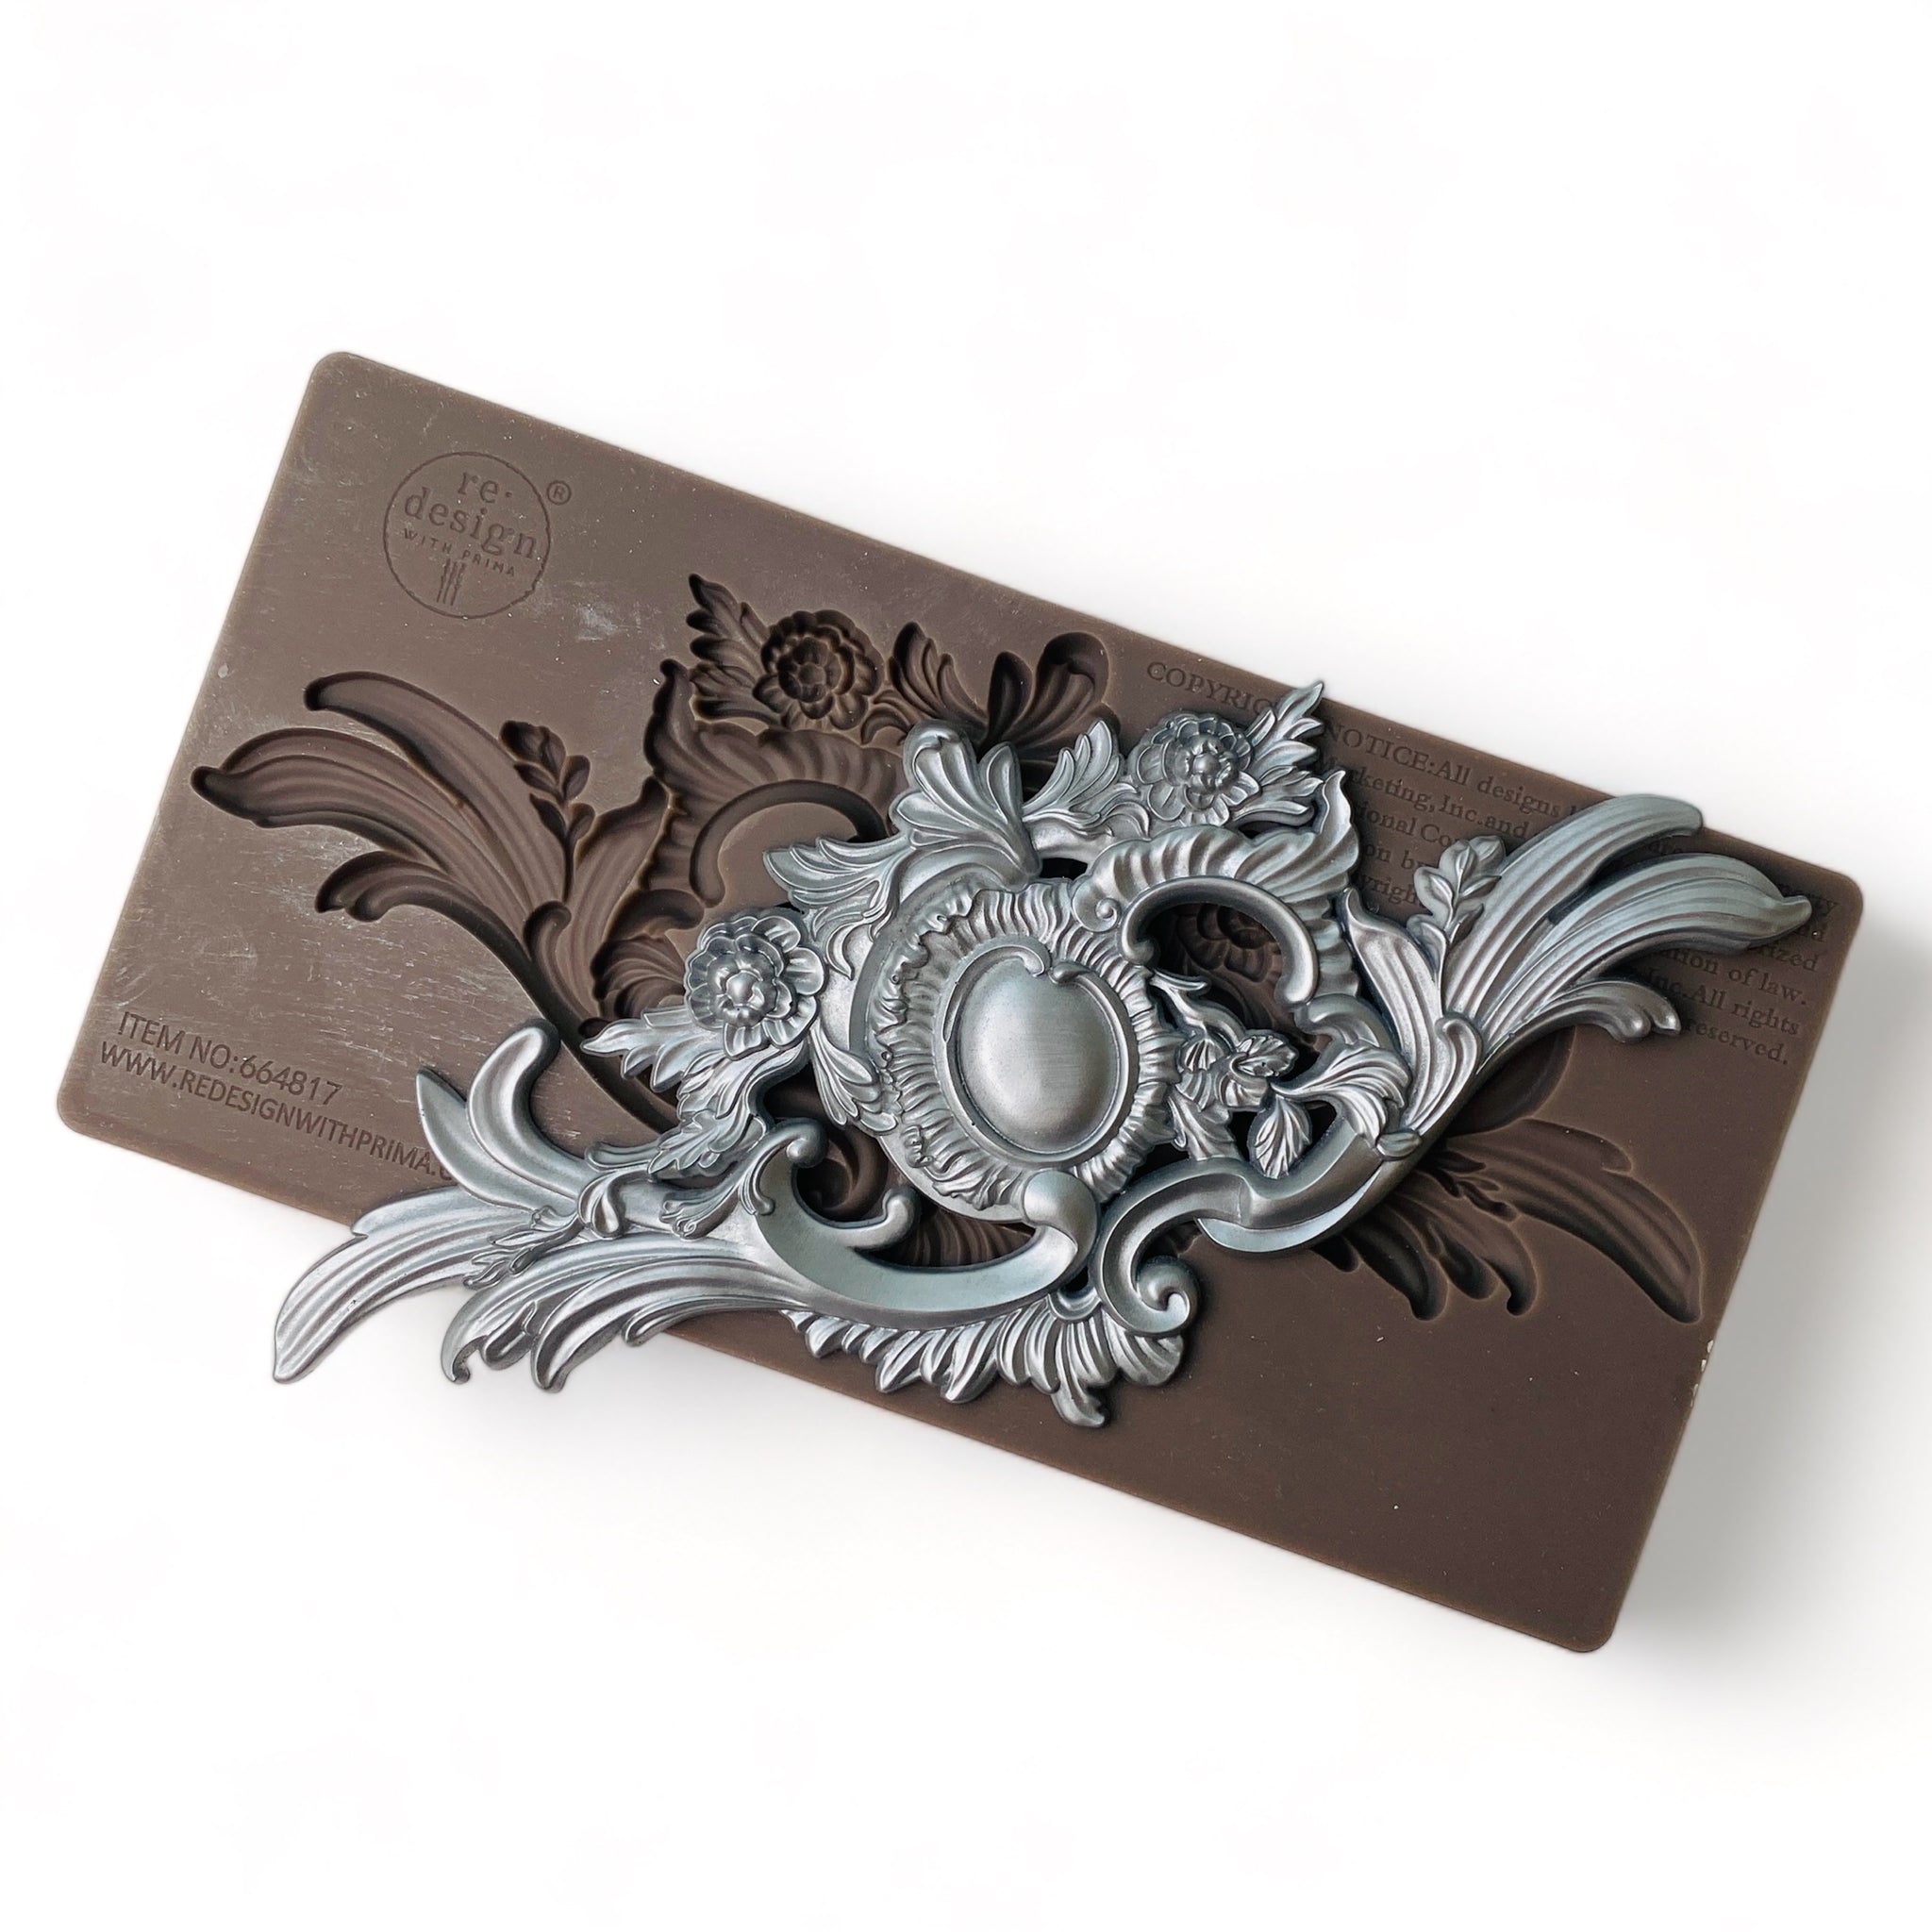 A brown silicone mold and silver colored casting that features a unique ornate flourish and central medallion are against a white background.